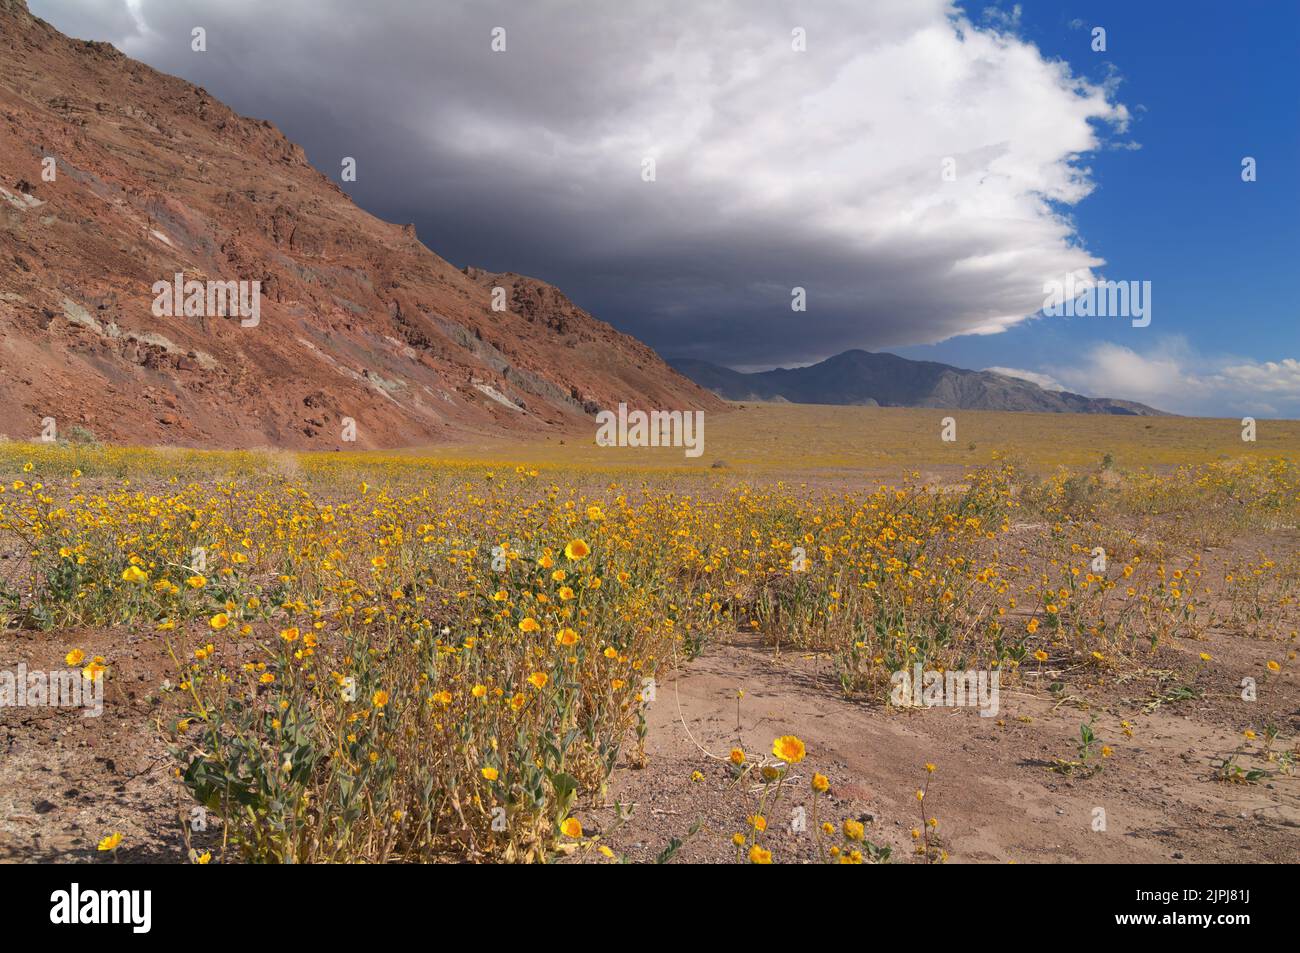 Death Valley during spring blooming, lots of yellow wildflowers on desert floor. Photo taken during a windy afternoon with storm clouds. Stock Photo